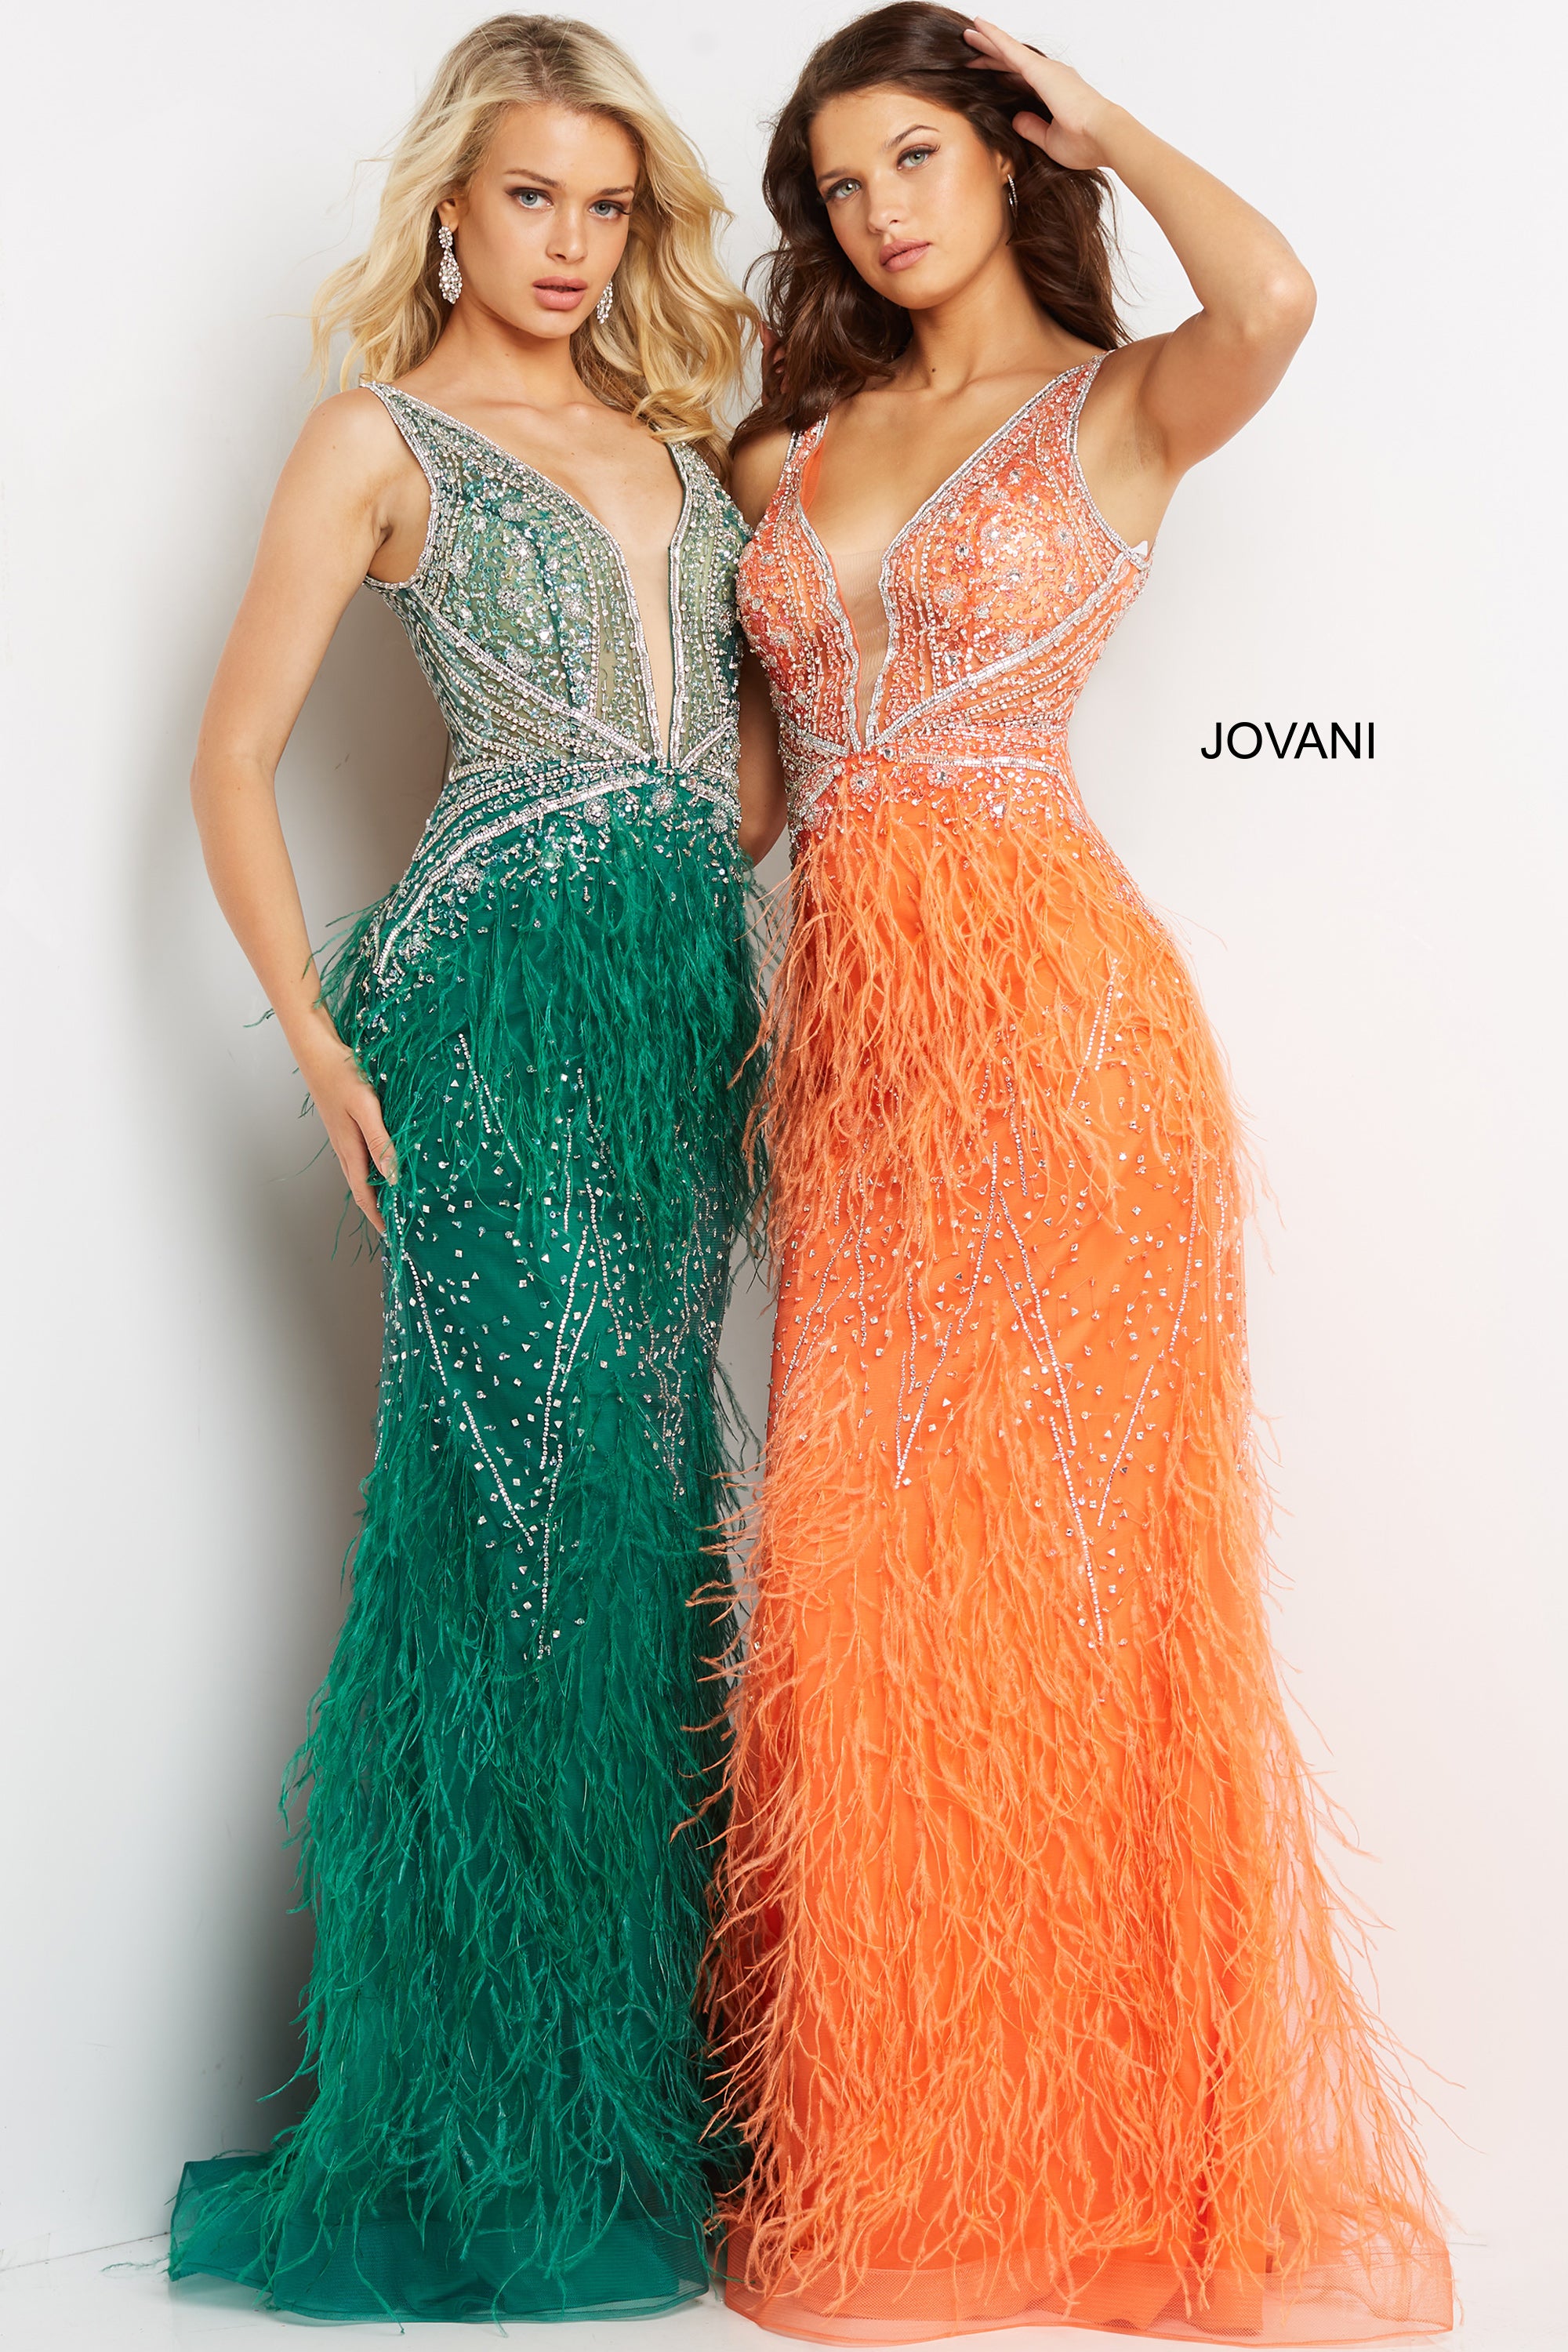 Jovani 06164 Orange Sequin and Feather Fitted Prom Dress – Sparkly